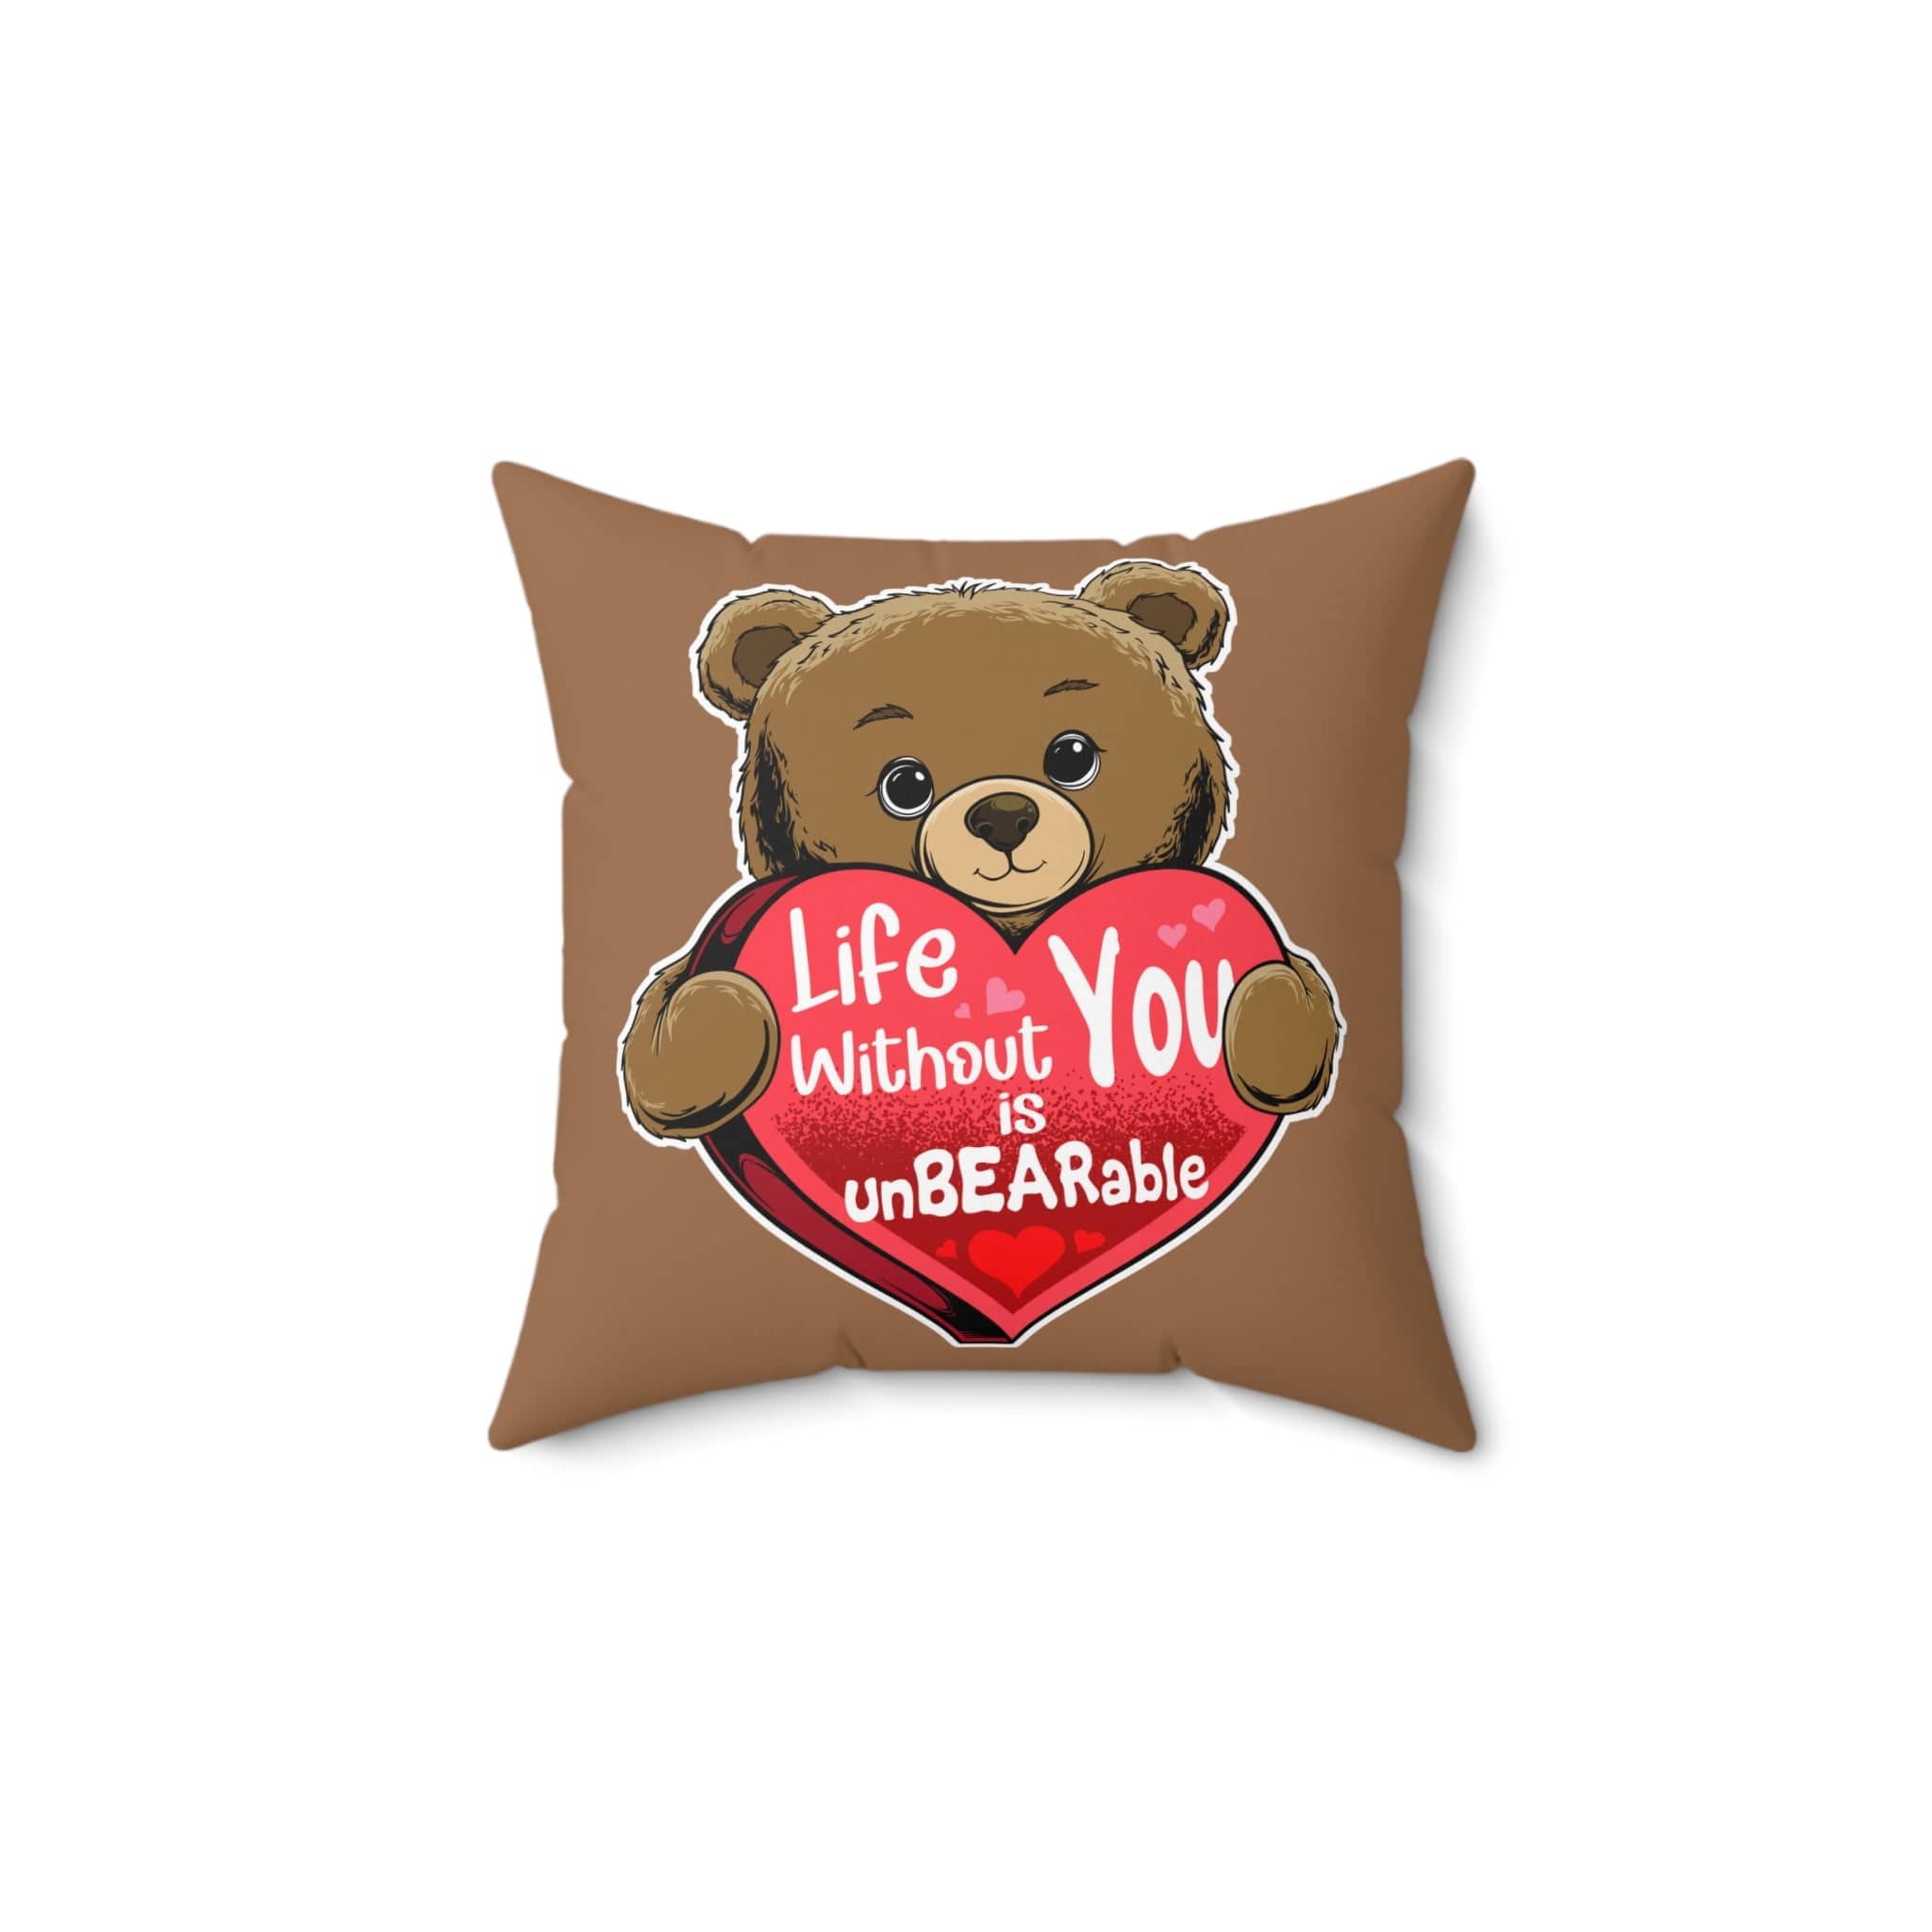 Life Without You Is UnBEARable Pillow color: Cape Palliser